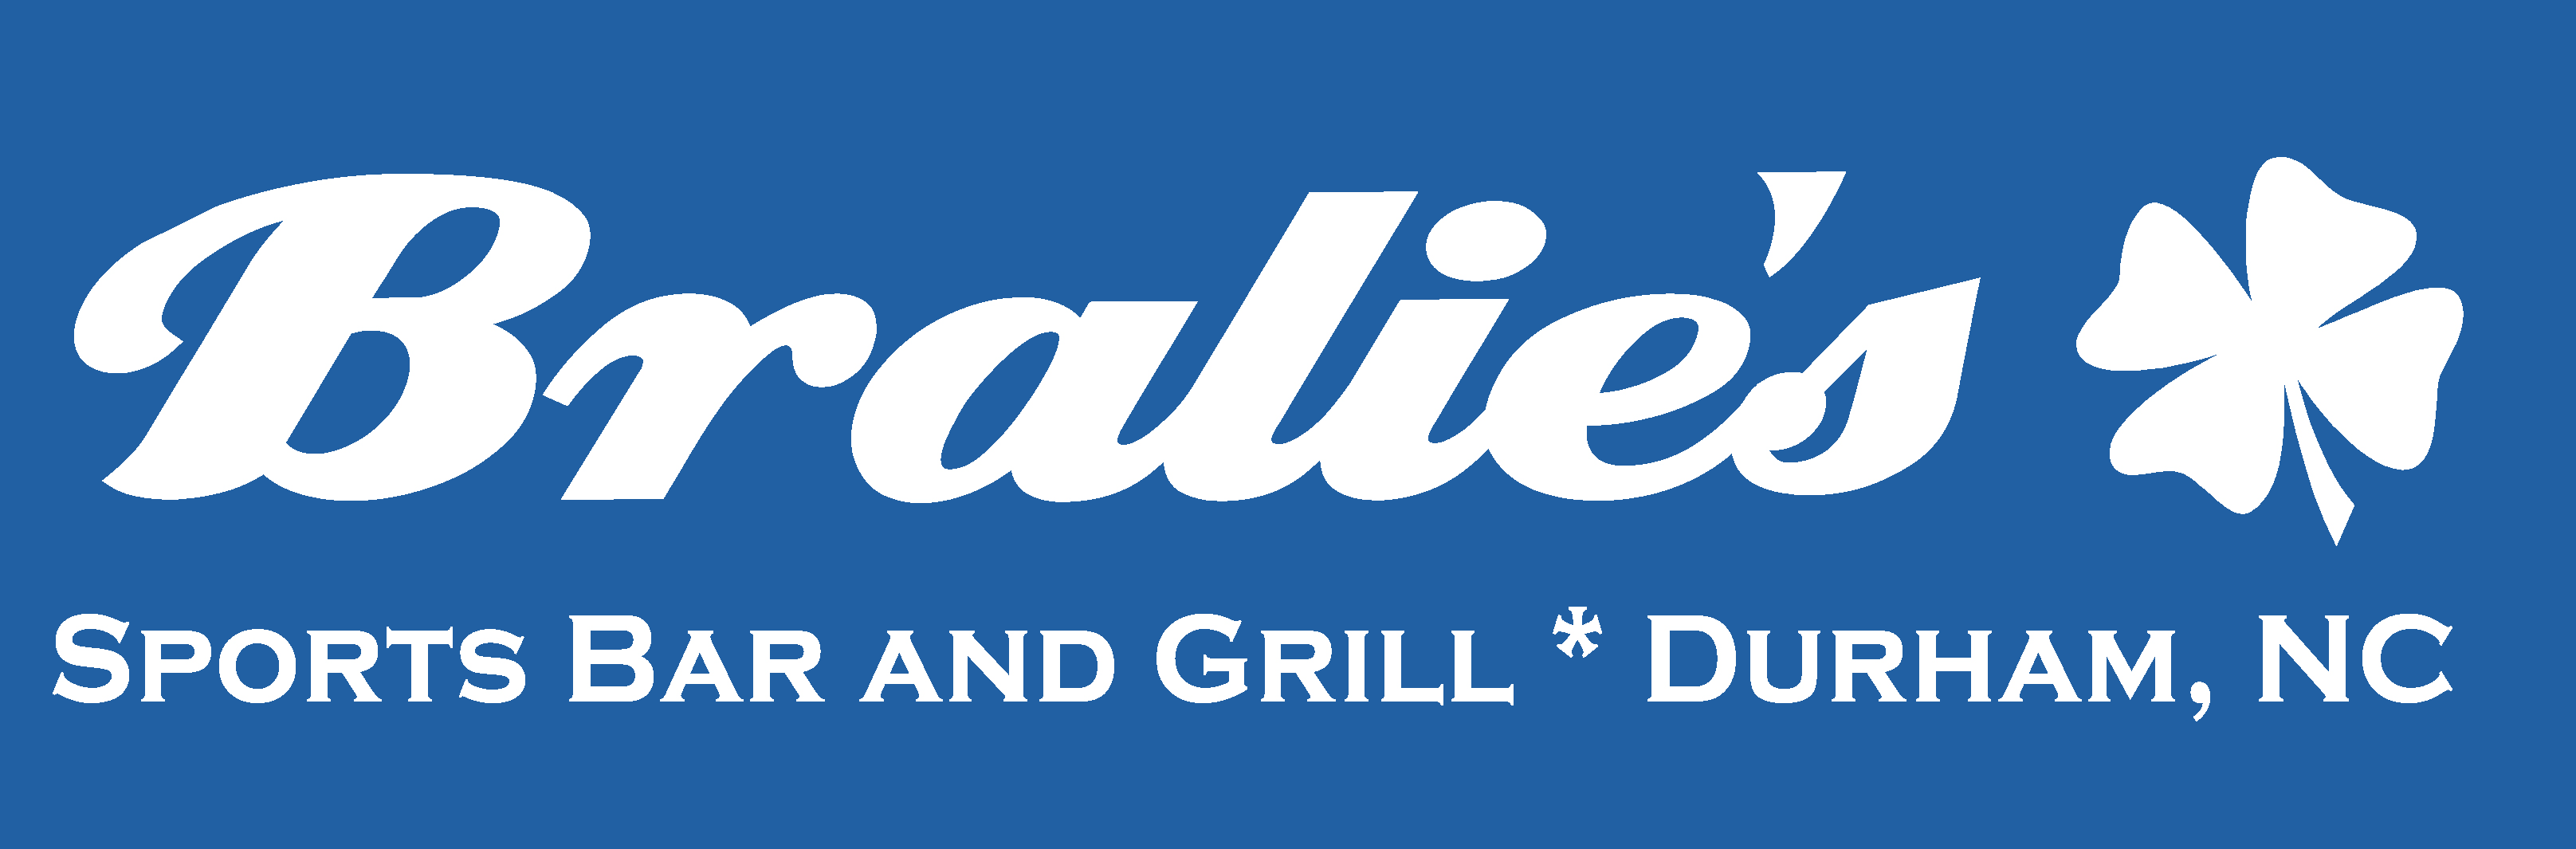 Bralie's Sports Bar and Grill